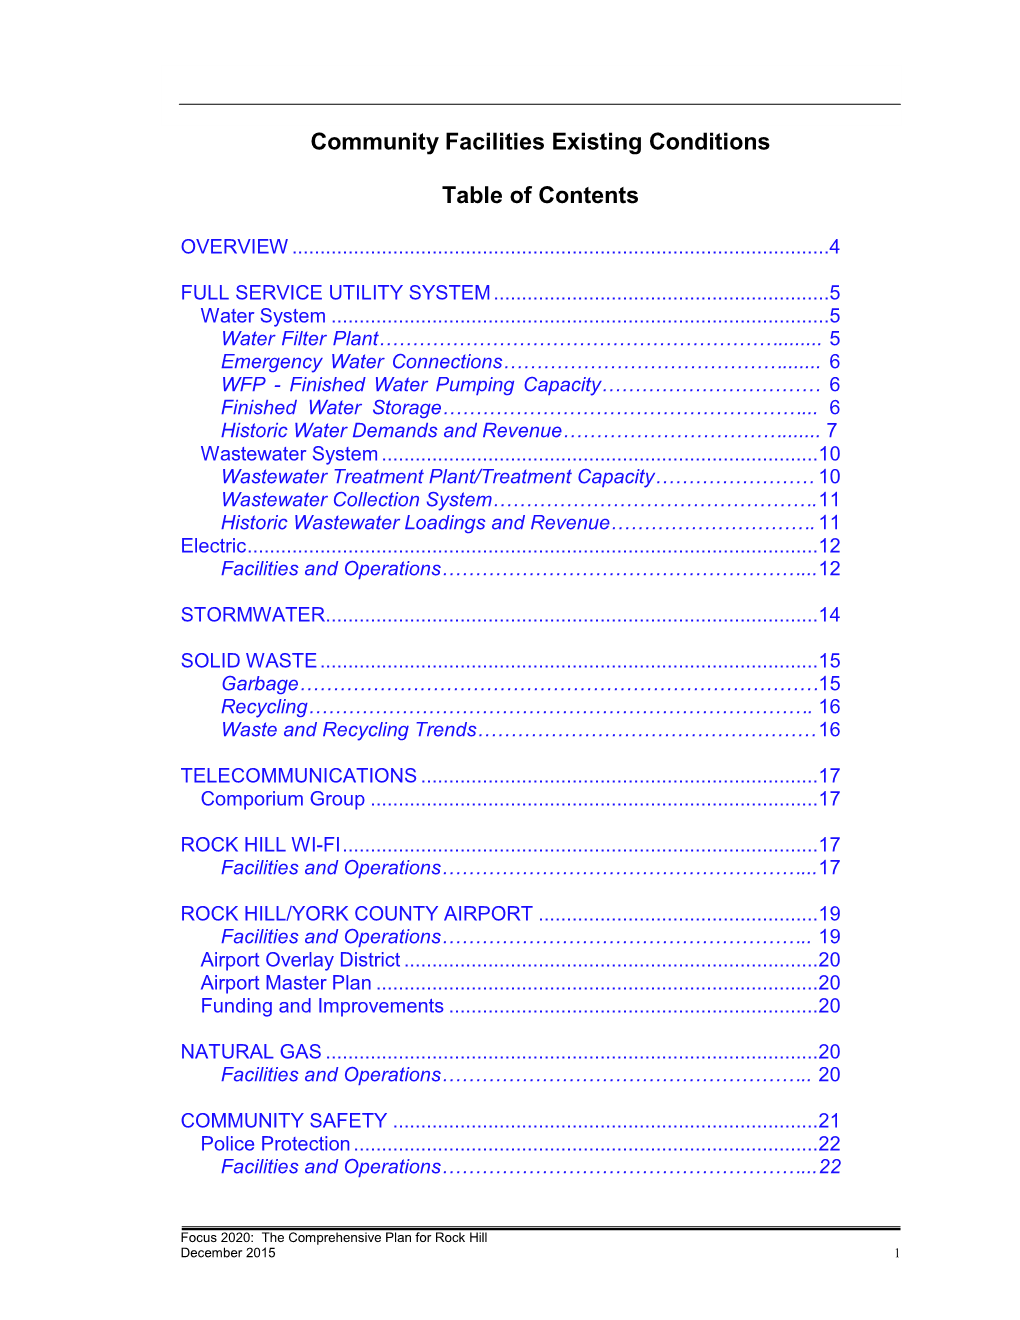 Community Facilities Existing Conditions Table of Contents